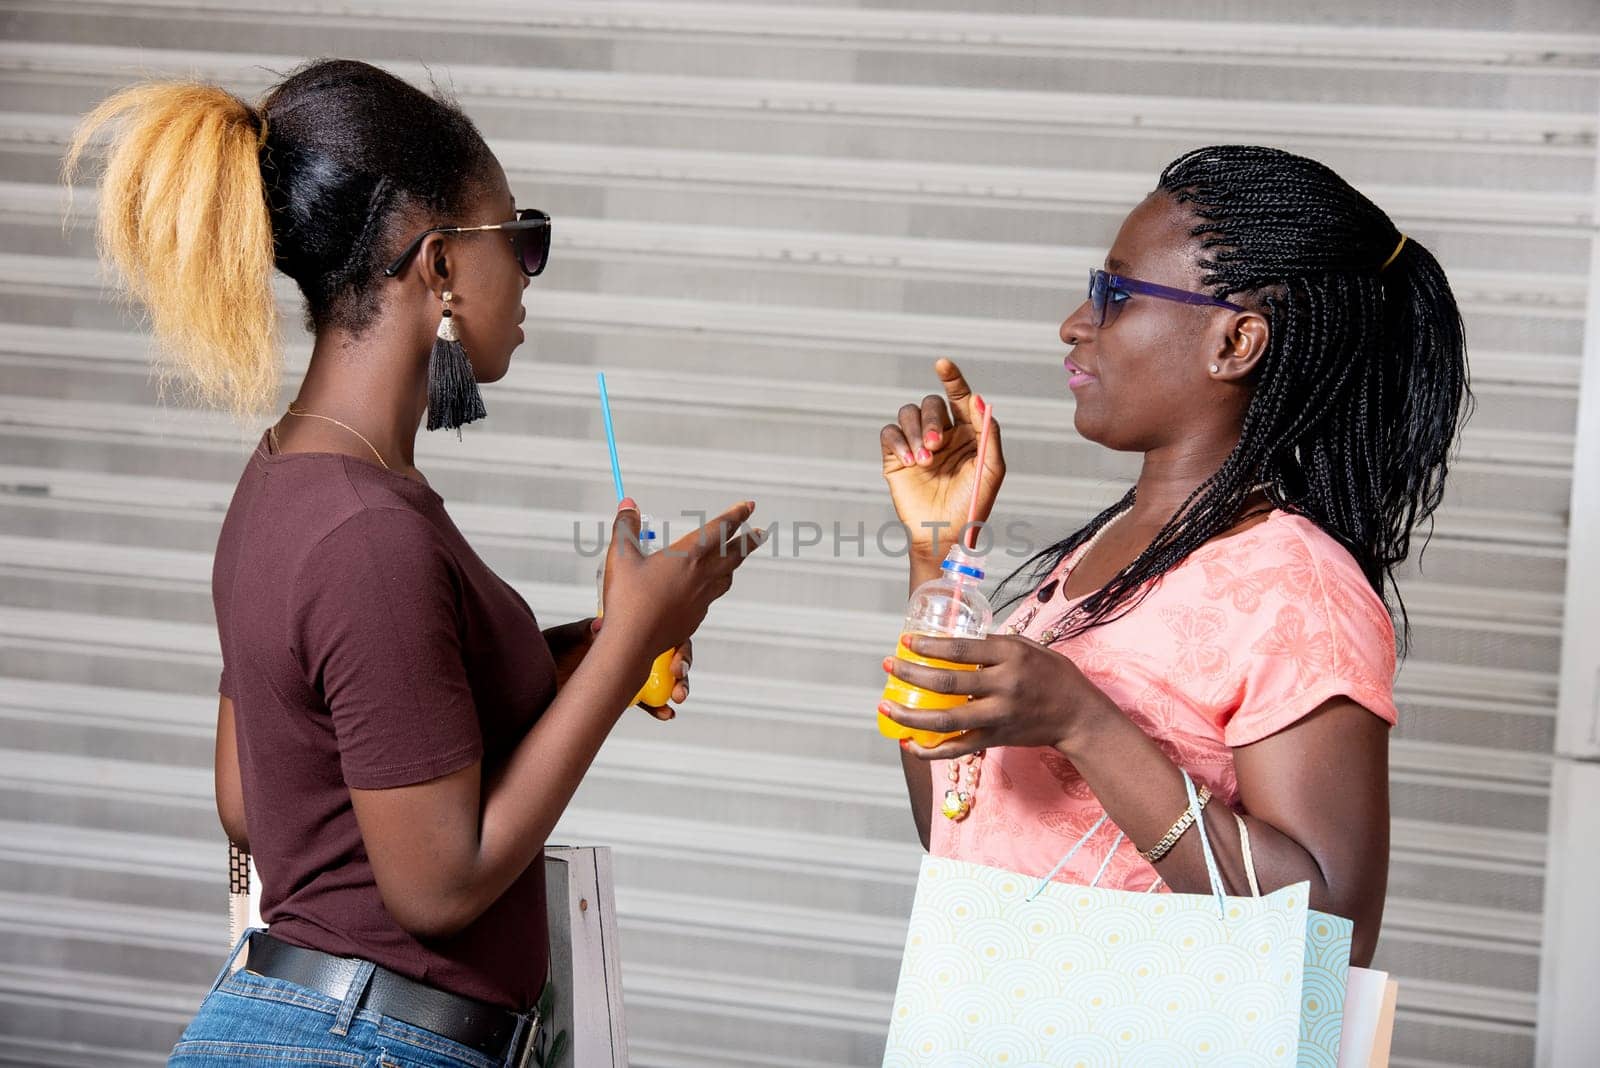 young girls standing in sunglasses with bottles of fruit juice chatting after shopping